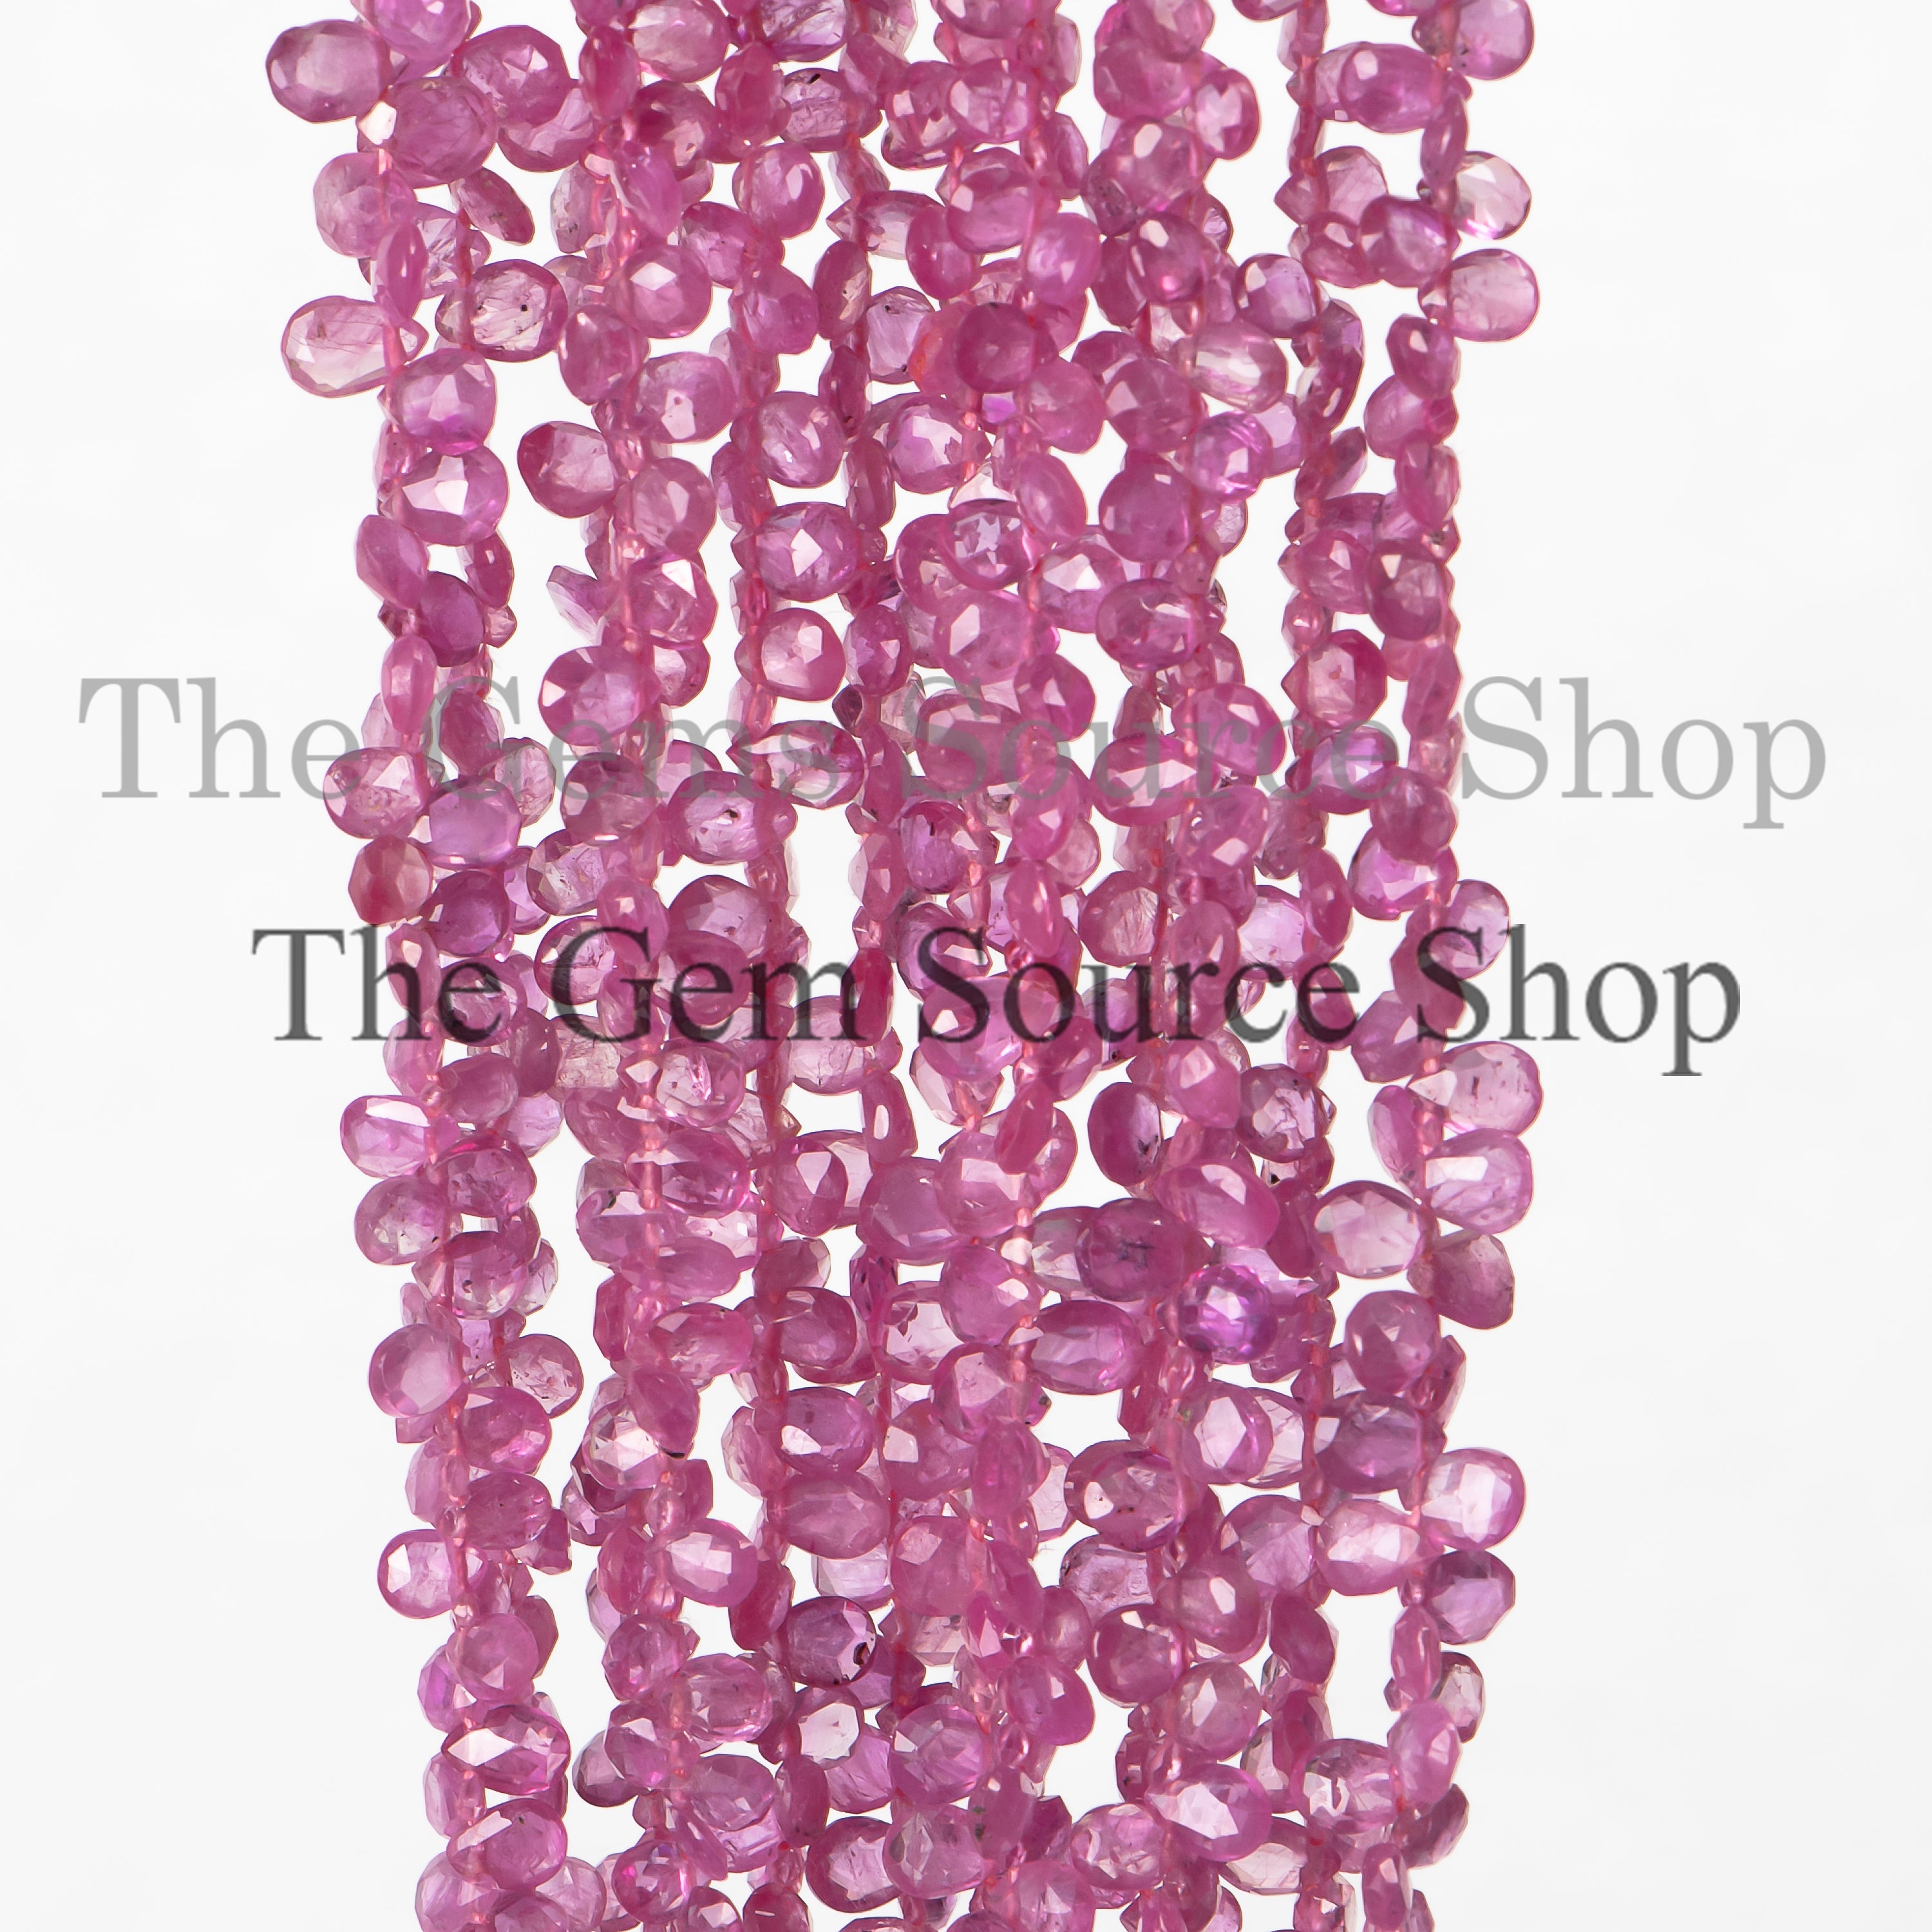 High Quality Burma Ruby Faceted Pear Shape Gemstone Natural Beads, Burma Ruby Faceted Beads, Burma Ruby Pear Shape Beads, Burma Ruby Beads